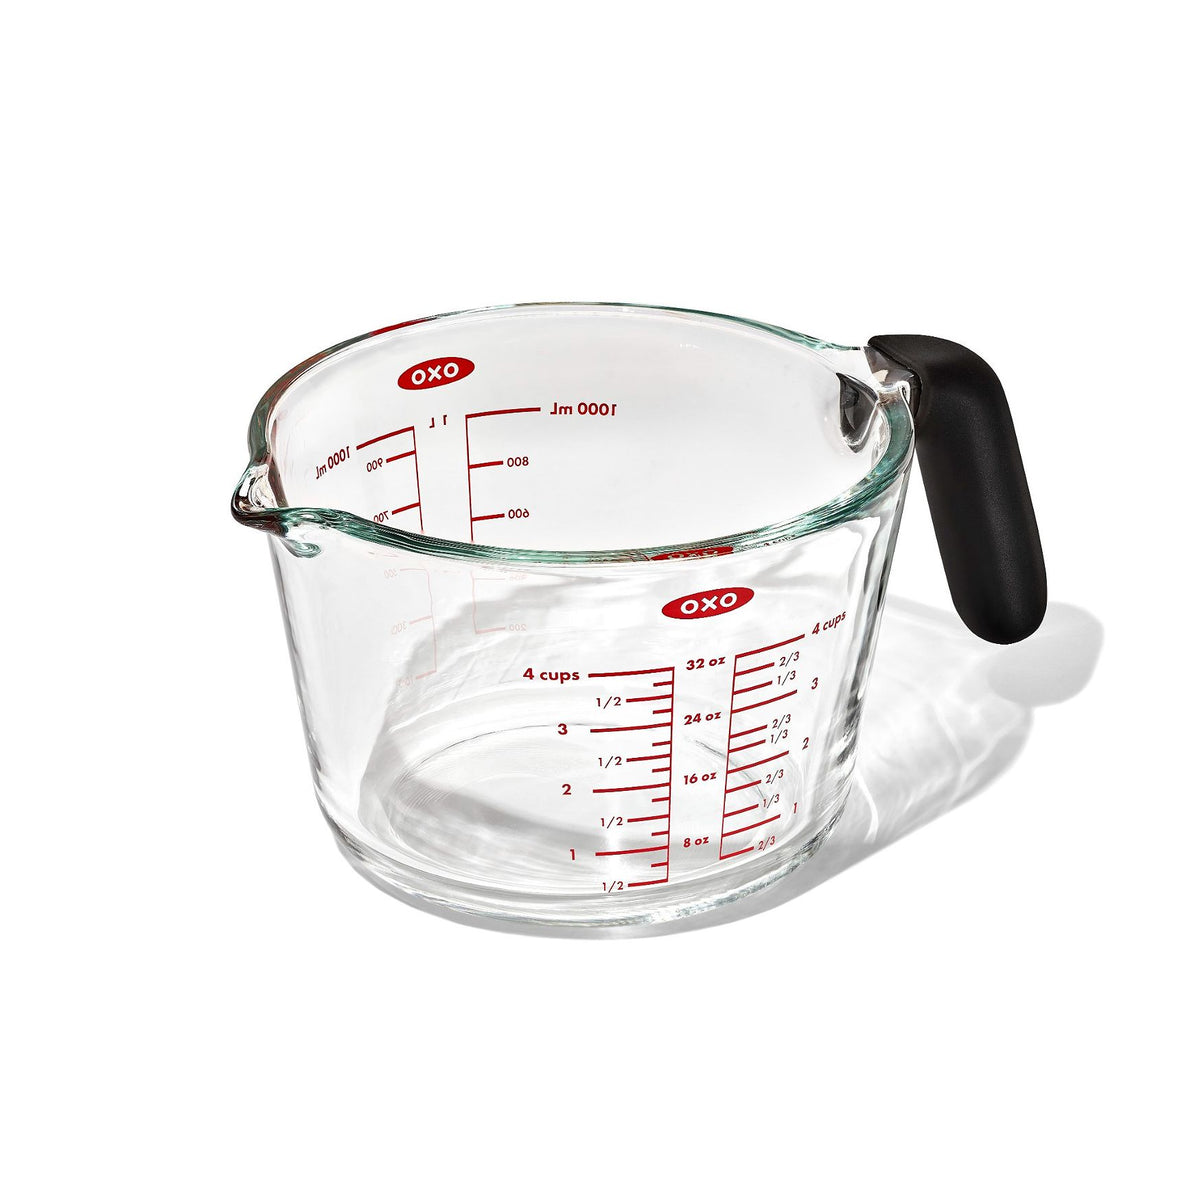 OXO Good Grips 4 Cup Glass Measuring Cup